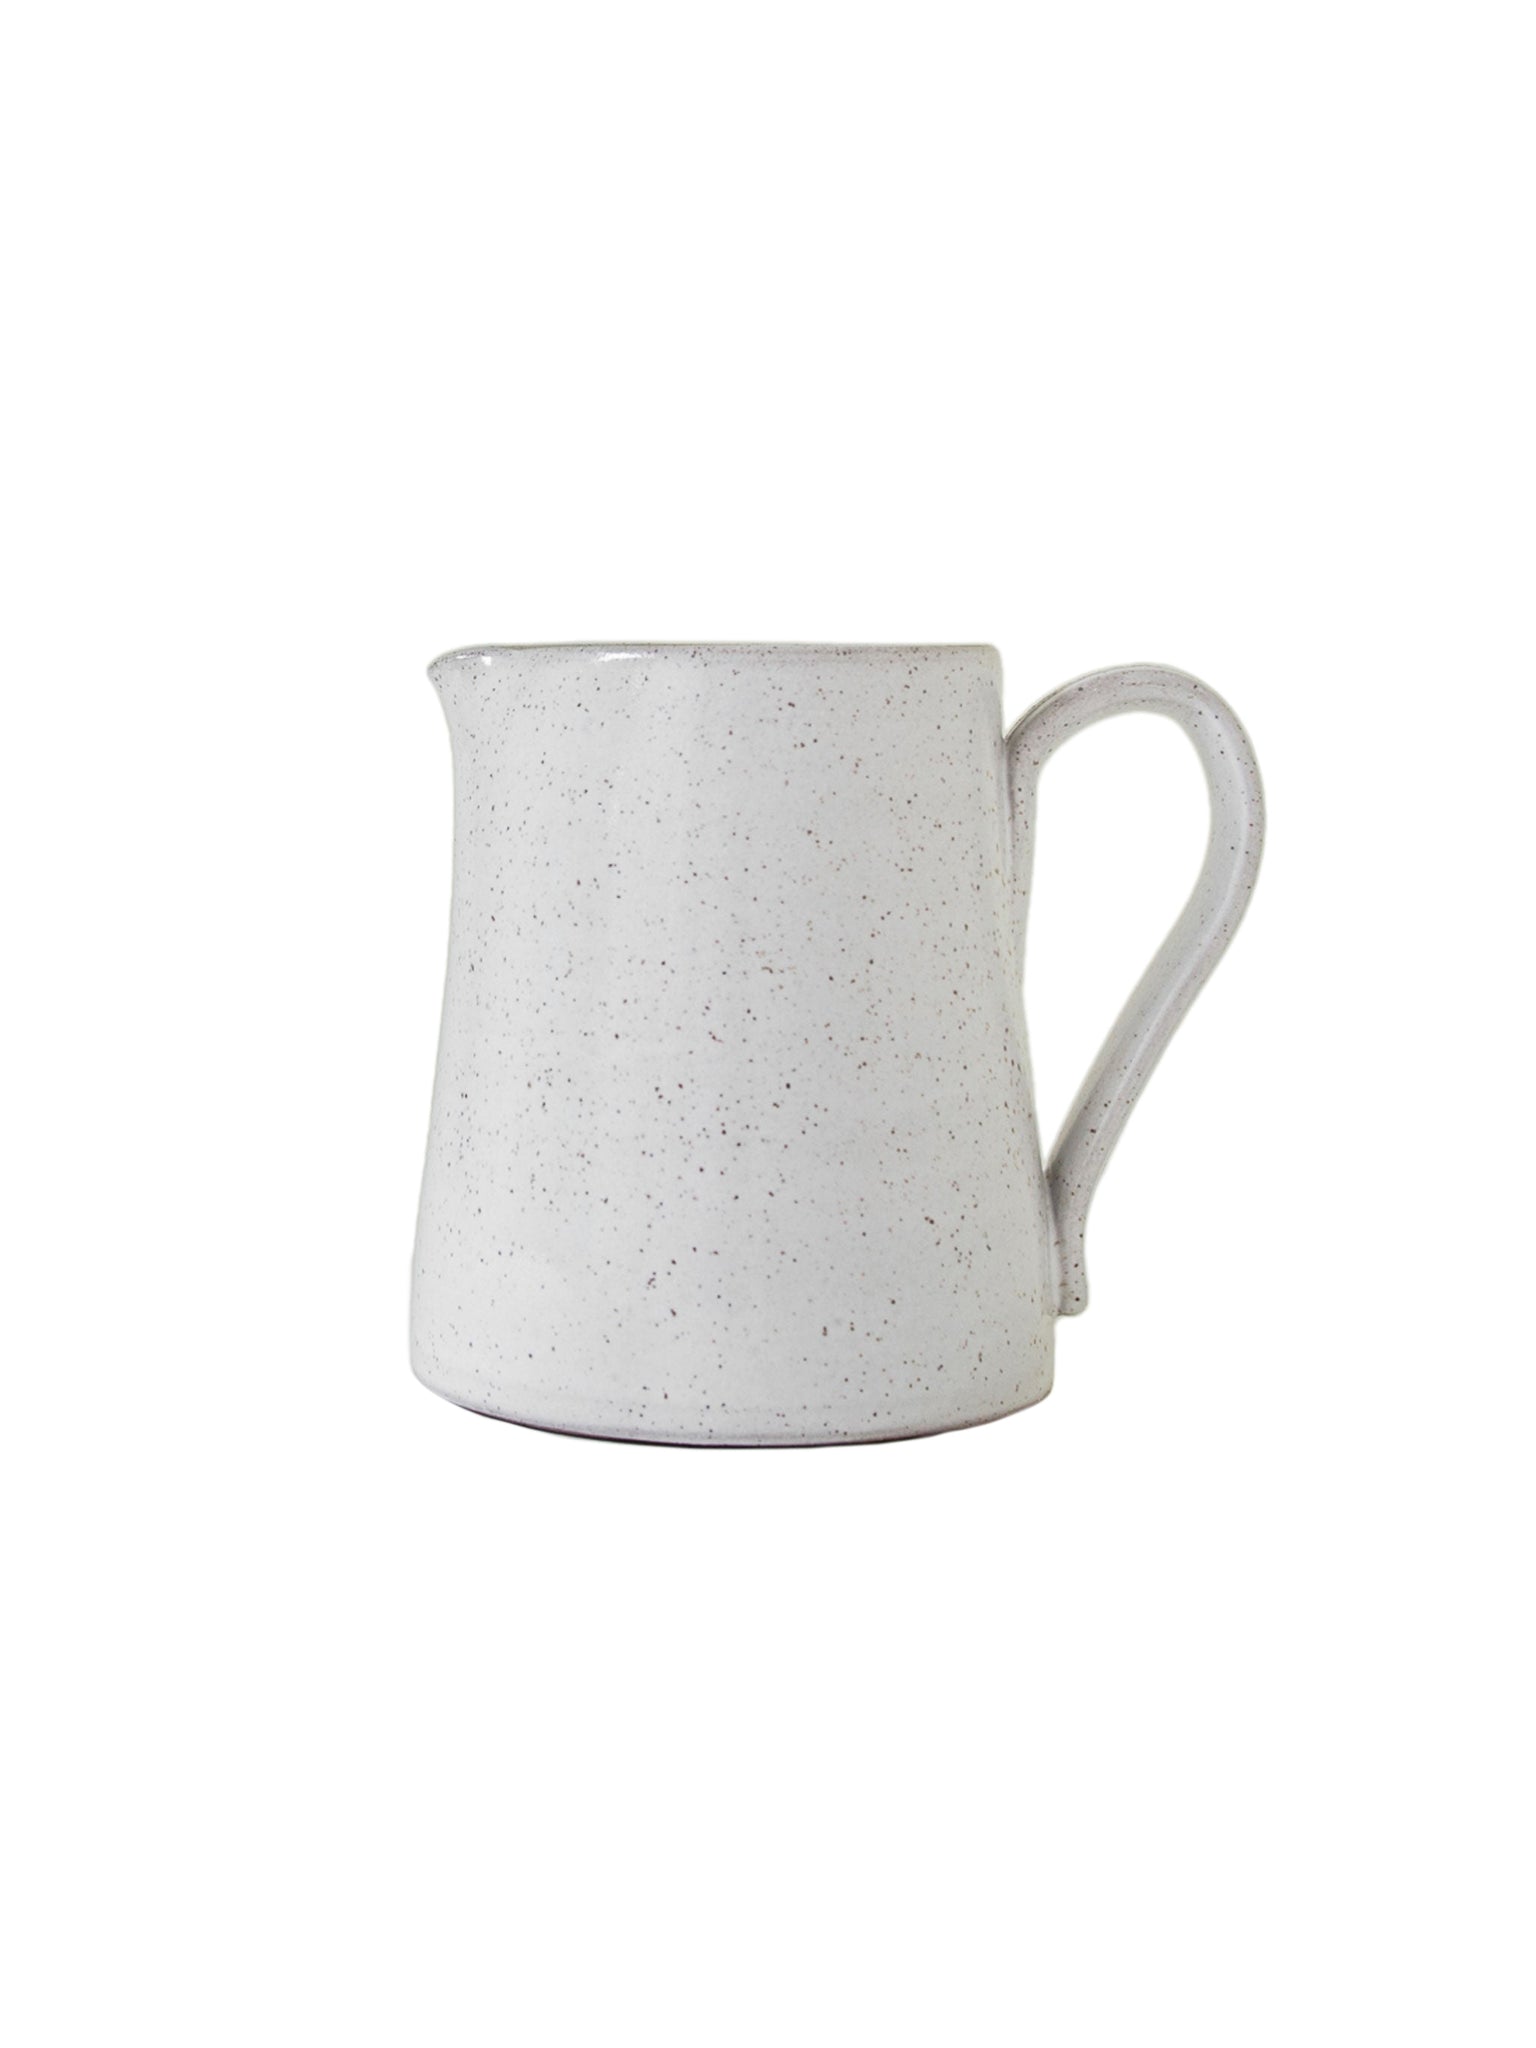 McQueen Pottery Speckled Pitcher Medium Weston Table